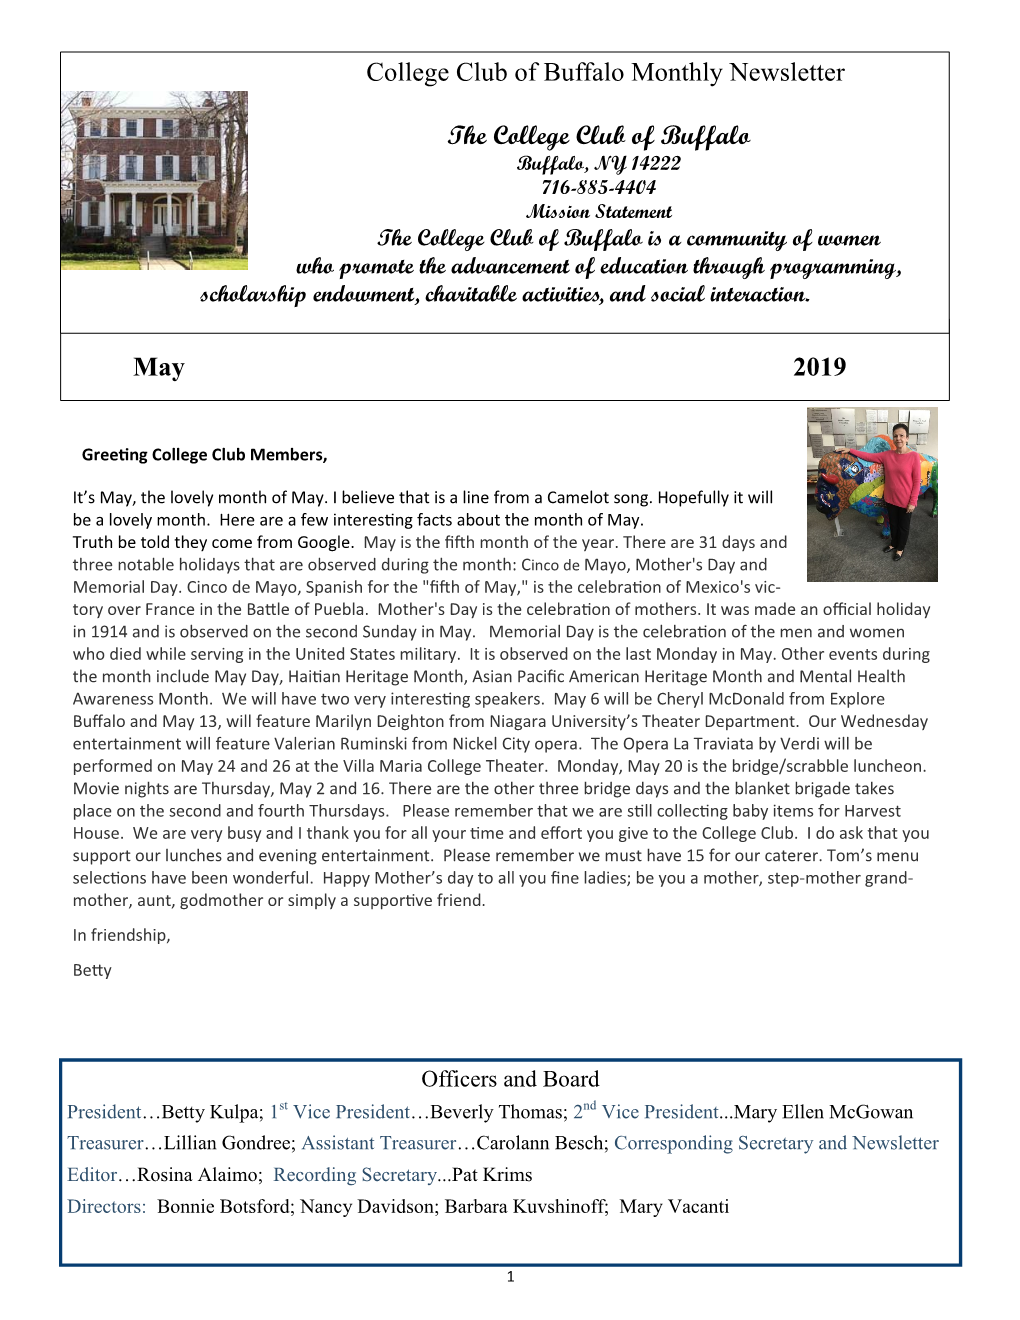 May 2019 College Club of Buffalo Monthly Newsletter the College